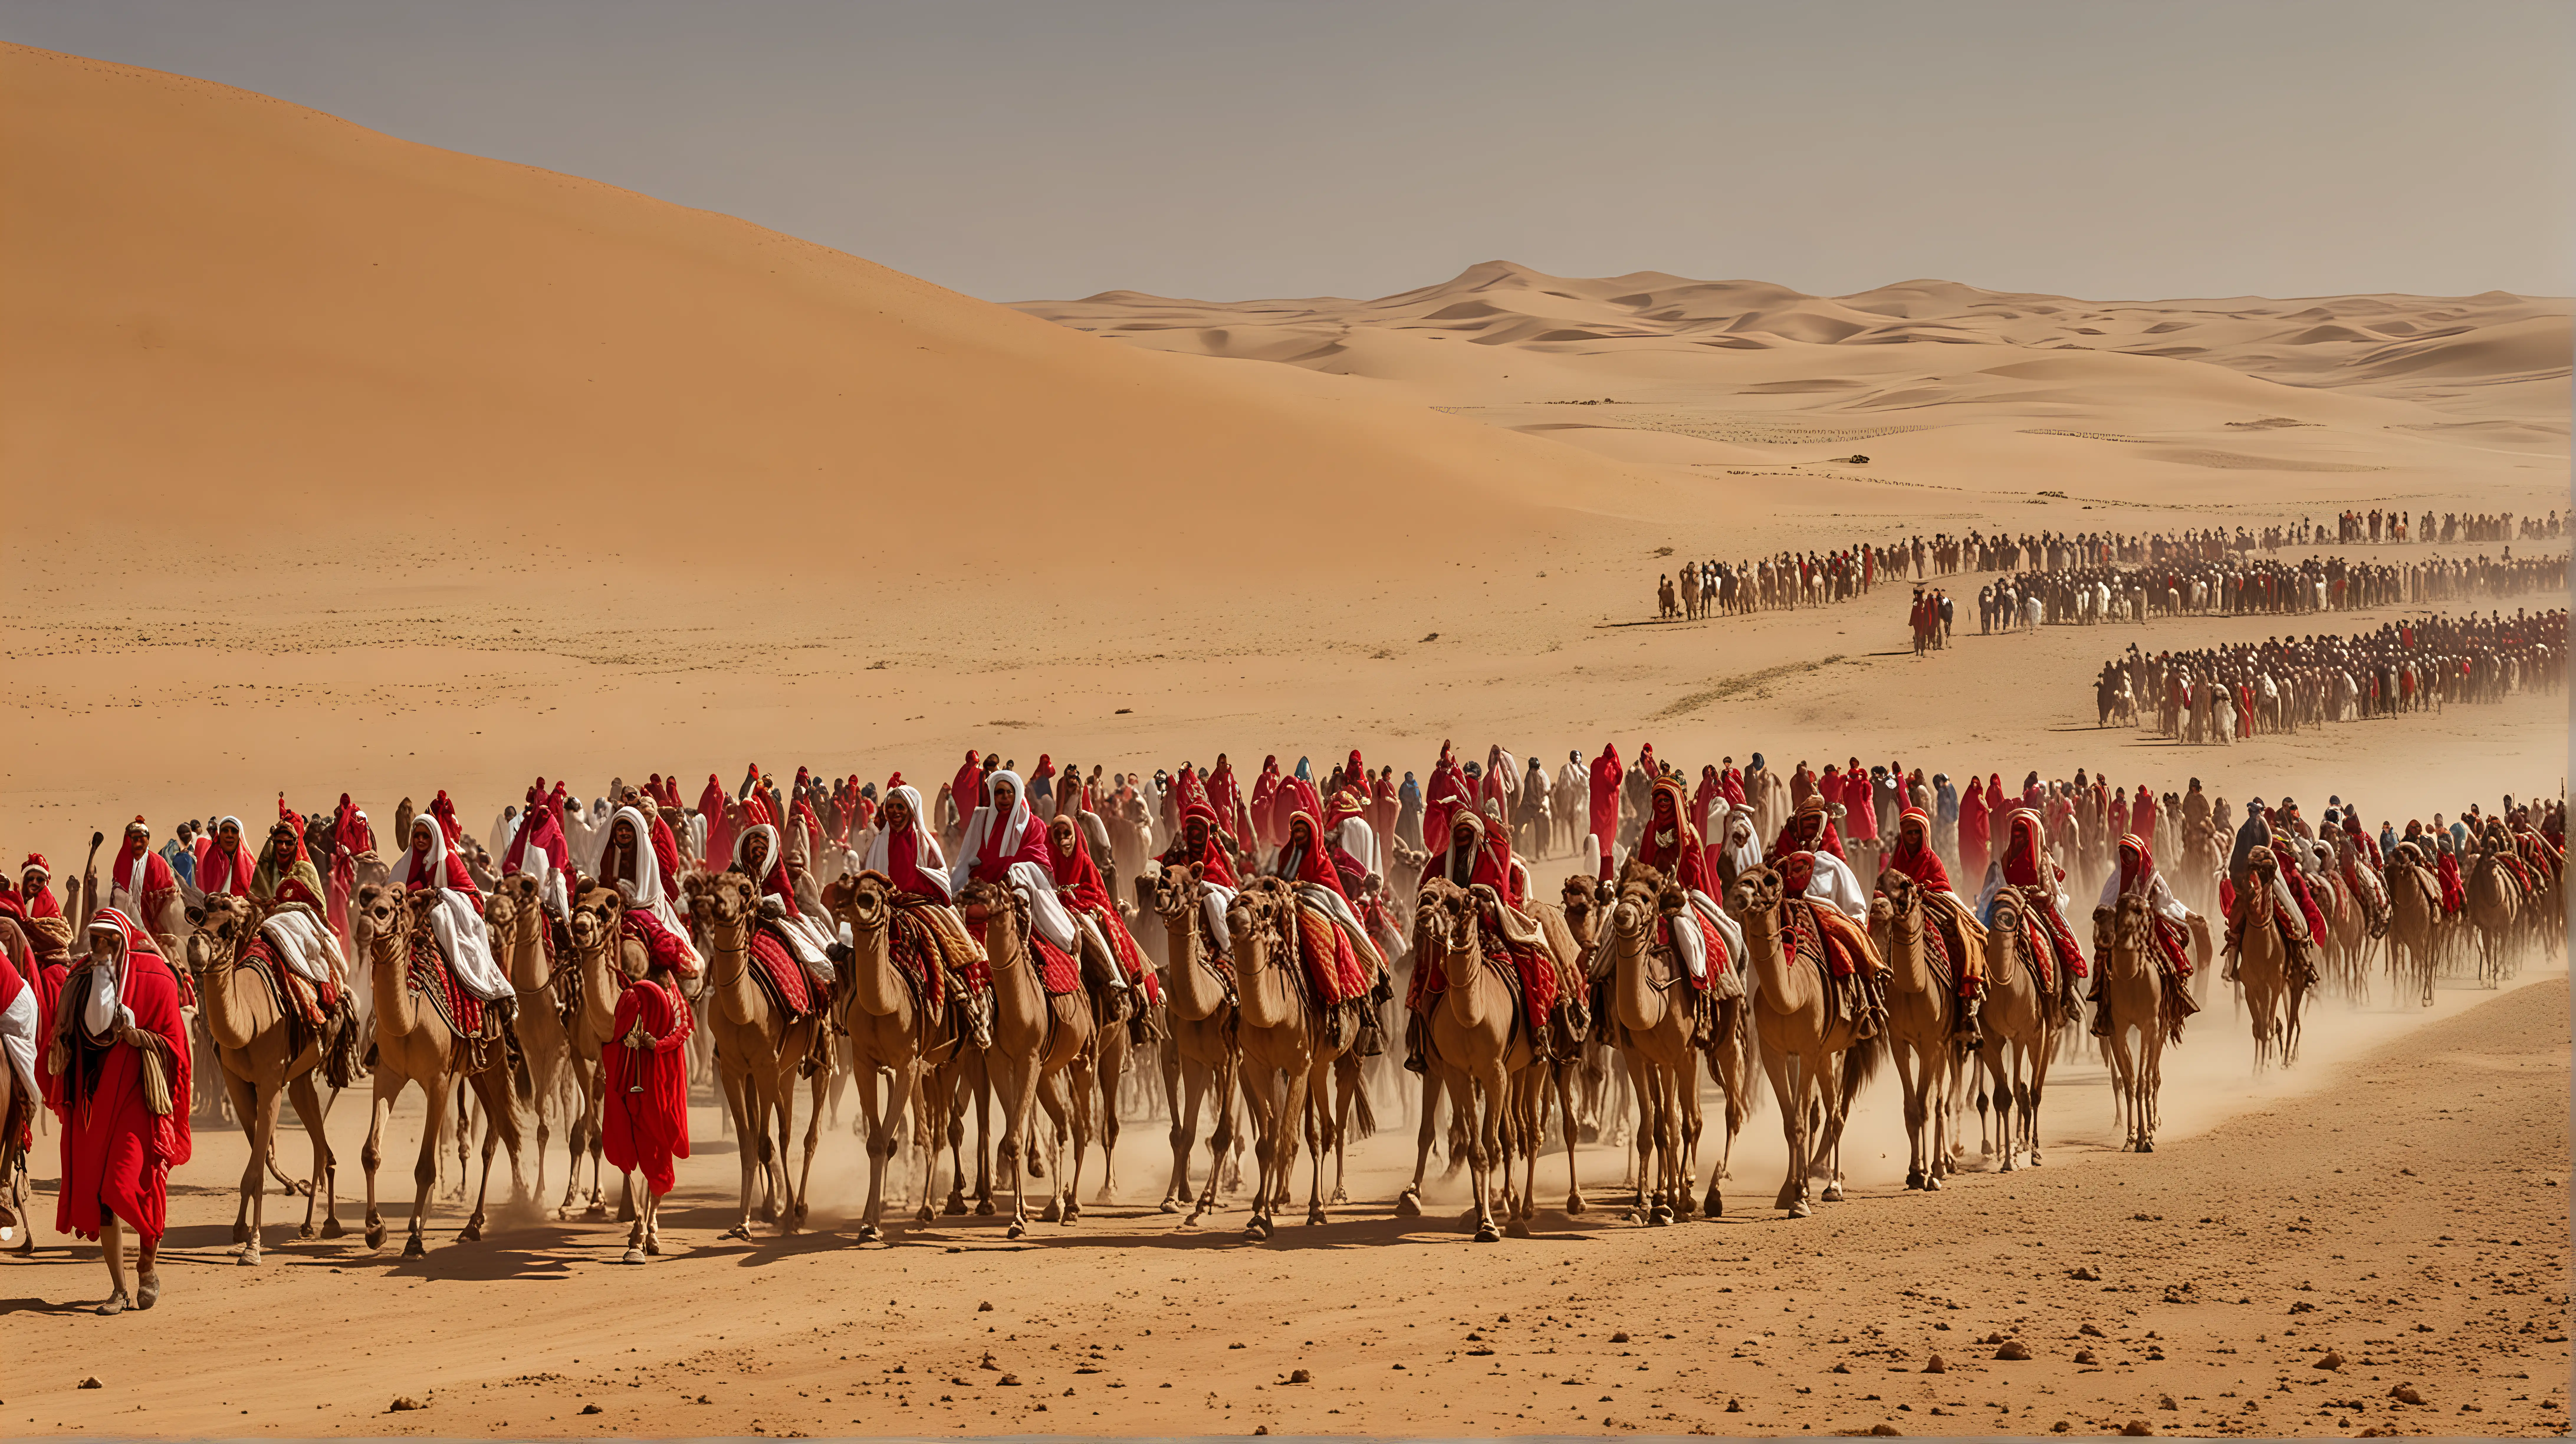 Queen of Sheba caravan on the way to meet king Salomon, crossing the desert, servants and soldiers, richly dressed in iron and silk, camels and horses, richly adorned, carring tents and gifts, midday sun, strong light, lots of red